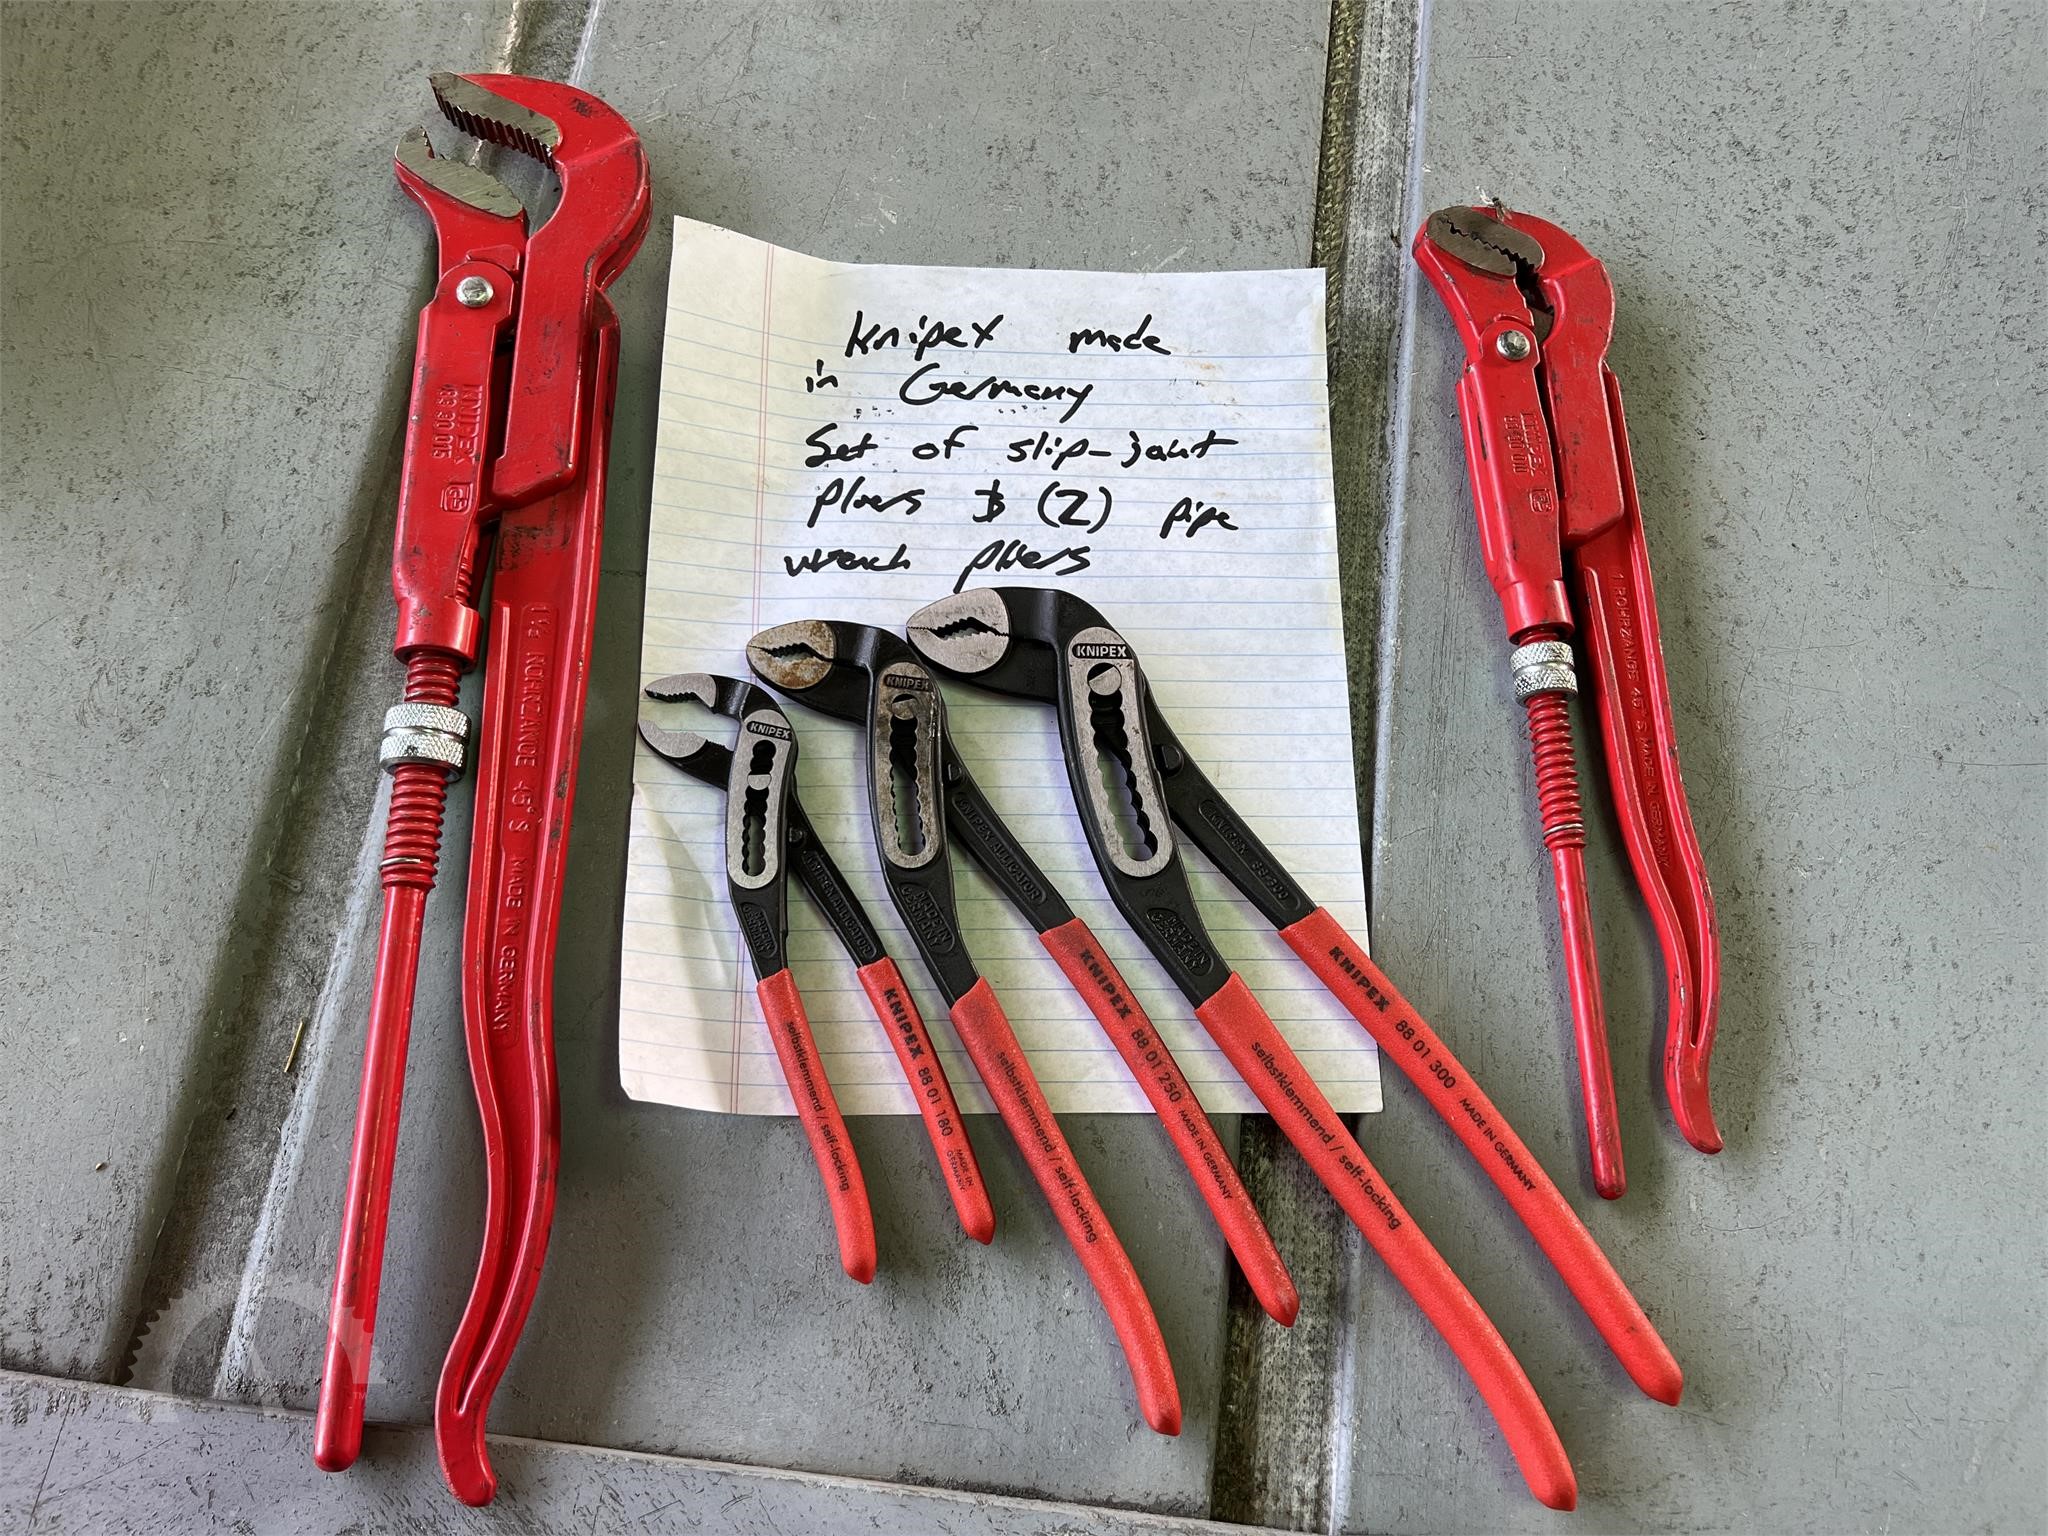 Knipex Round Nose Looping Pliers - Stealth Tackle